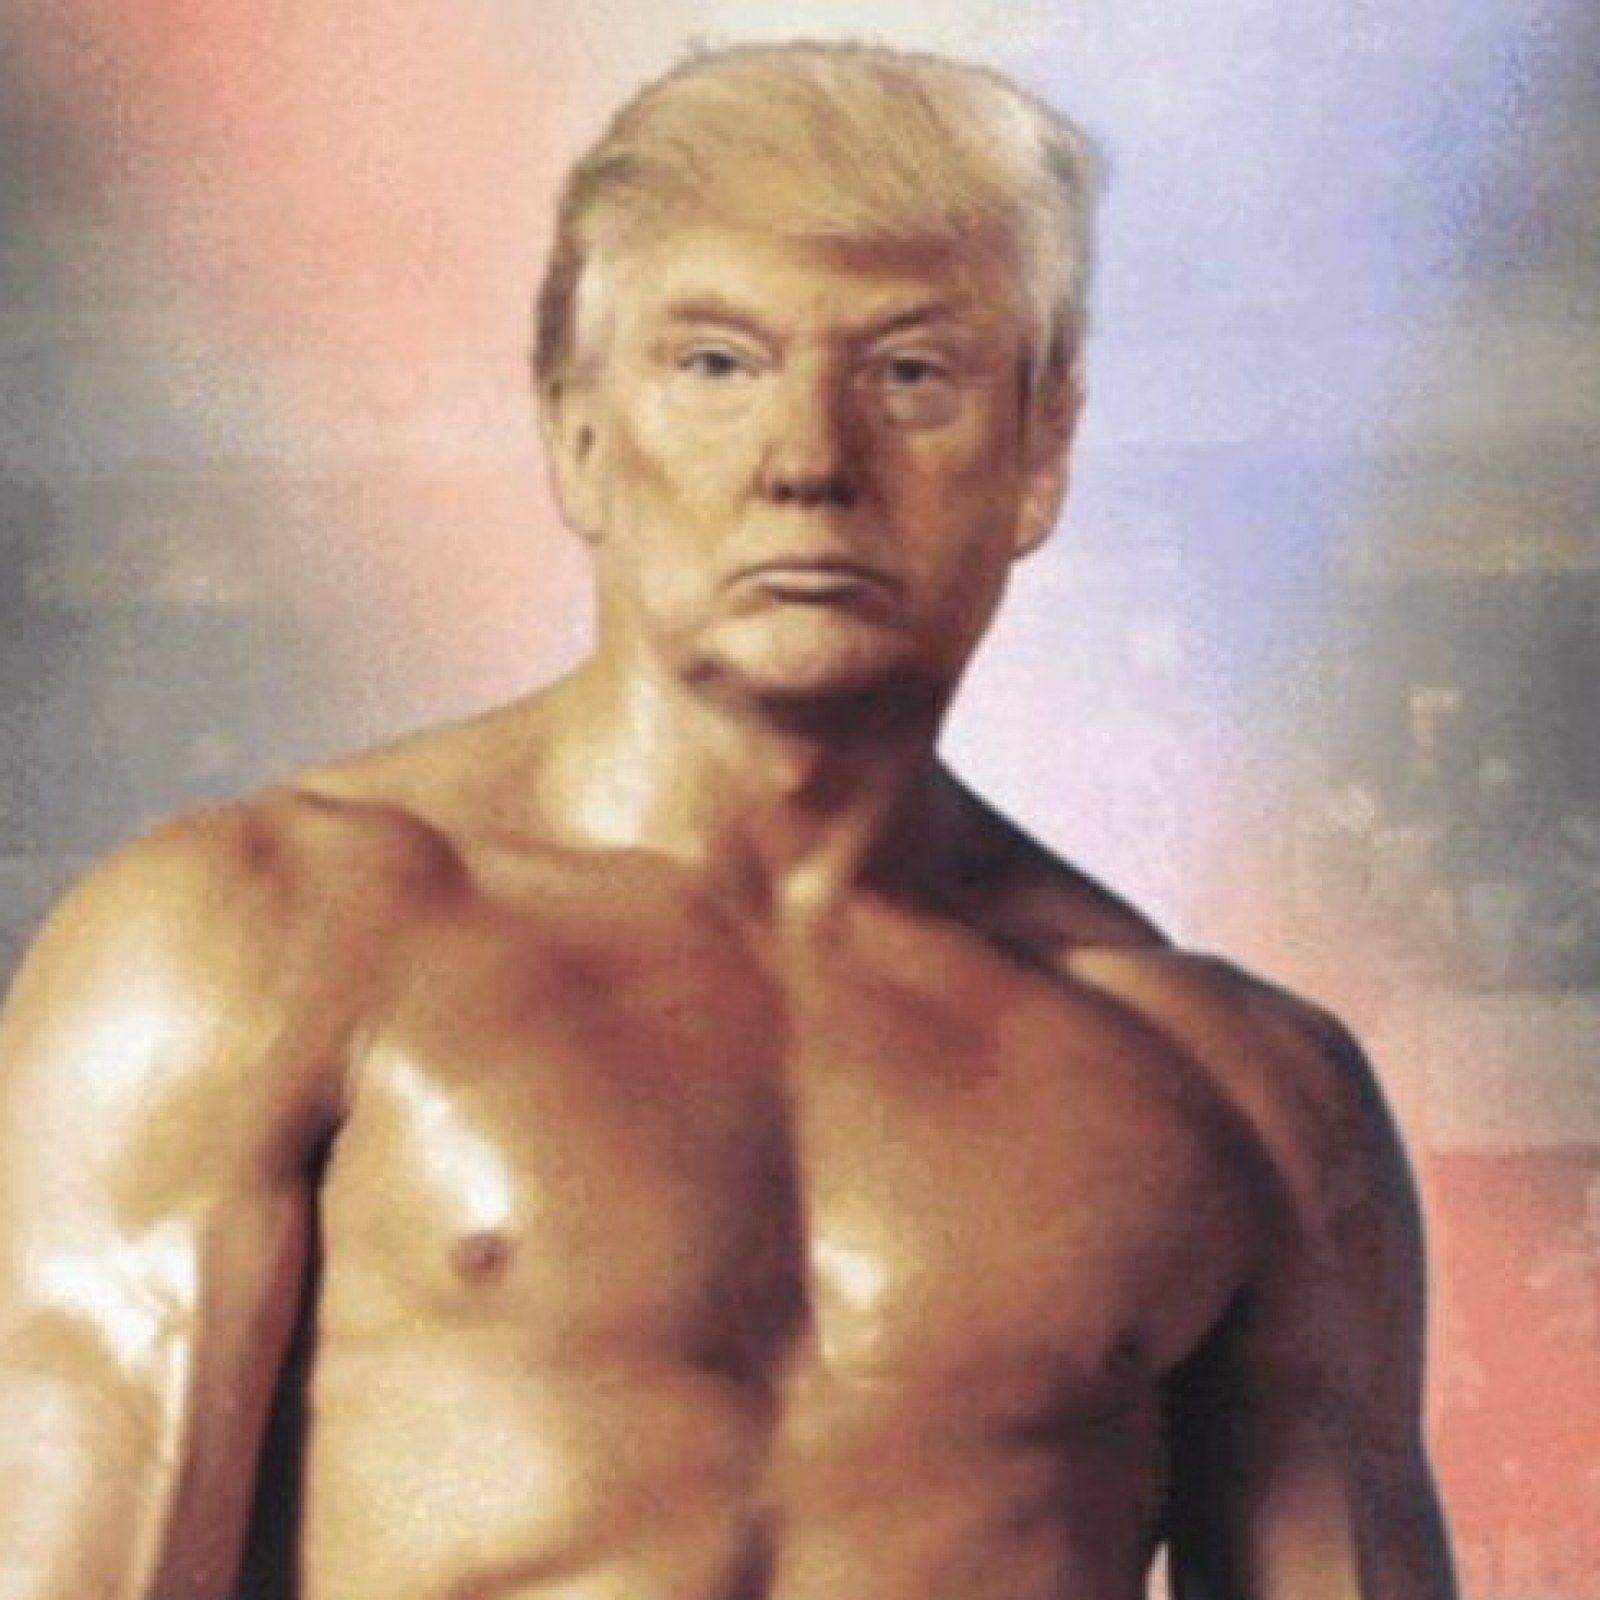 Donald Trump Campaign Disputes Claim That Photo of President As Rocky Balboa Was 'Doctored'